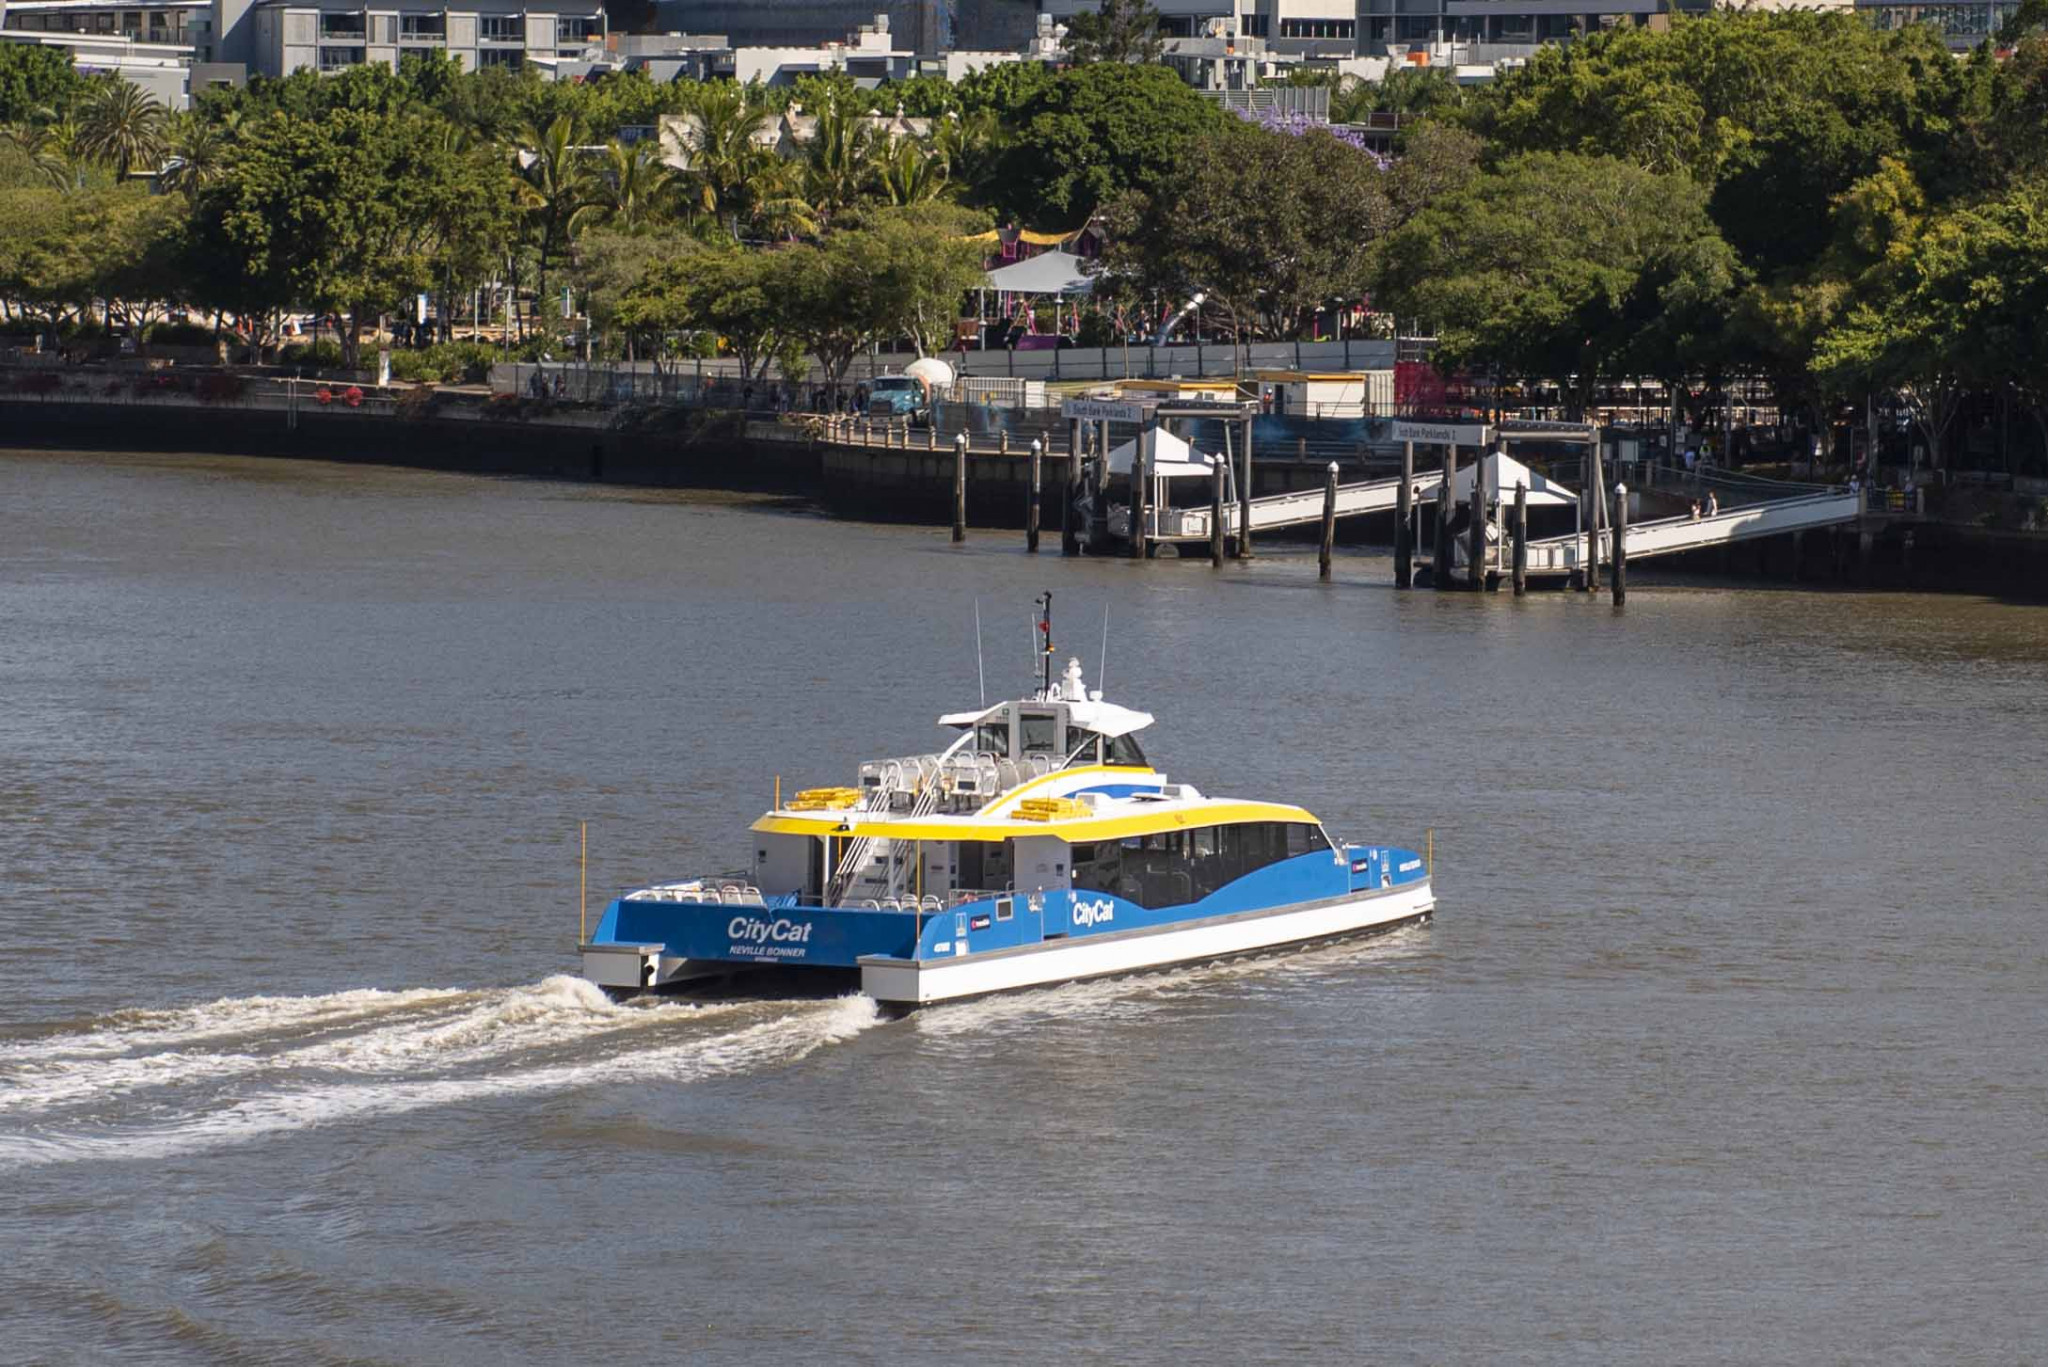 The CityCat service runs from 5:30am to midnight each day ©Brisbane City Council